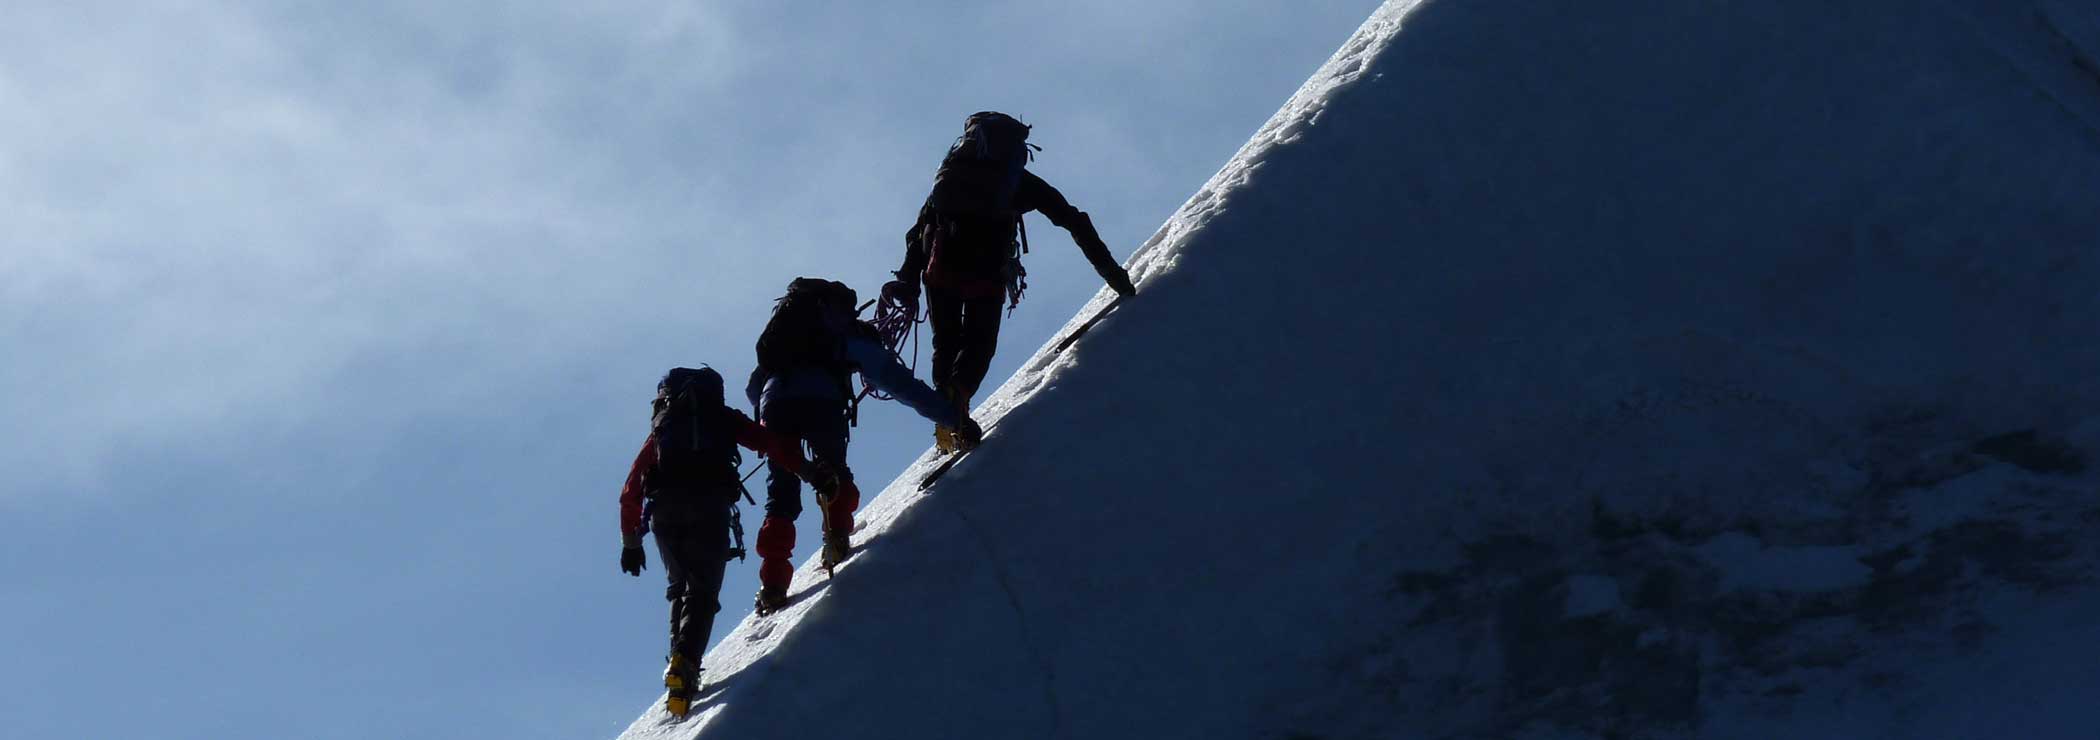 Three mountaineers on short rope